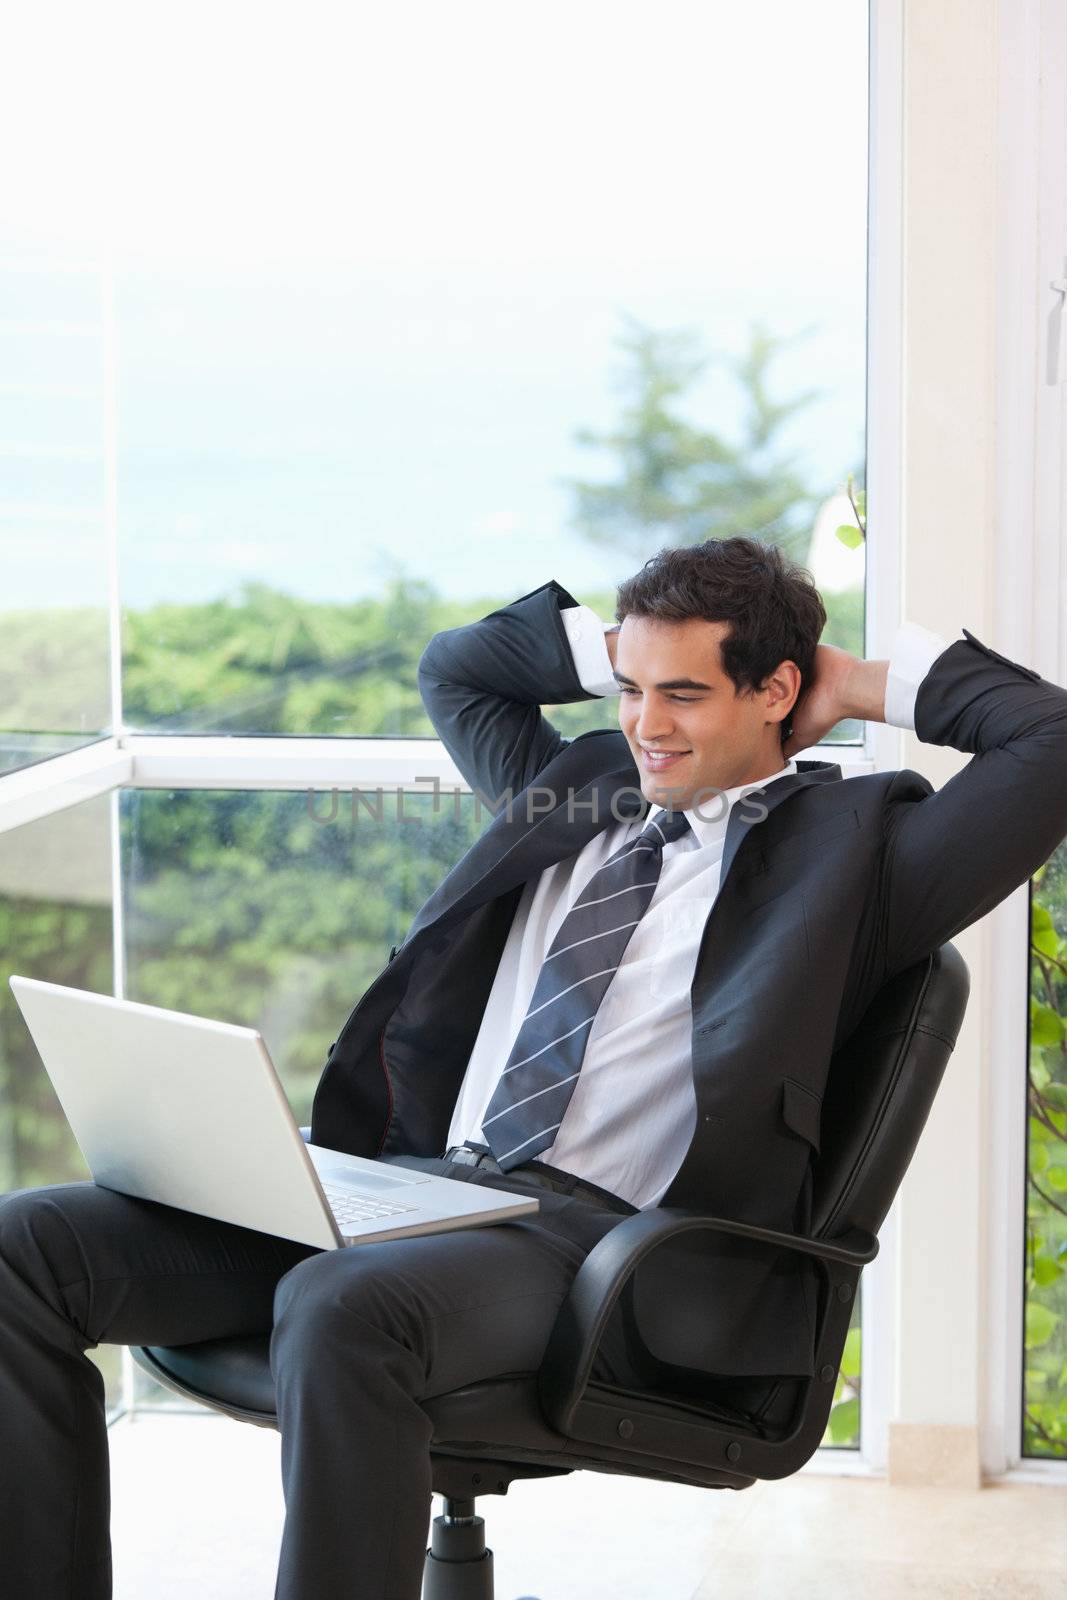 Men sitting in a chair looking at a laptop by Wavebreakmedia